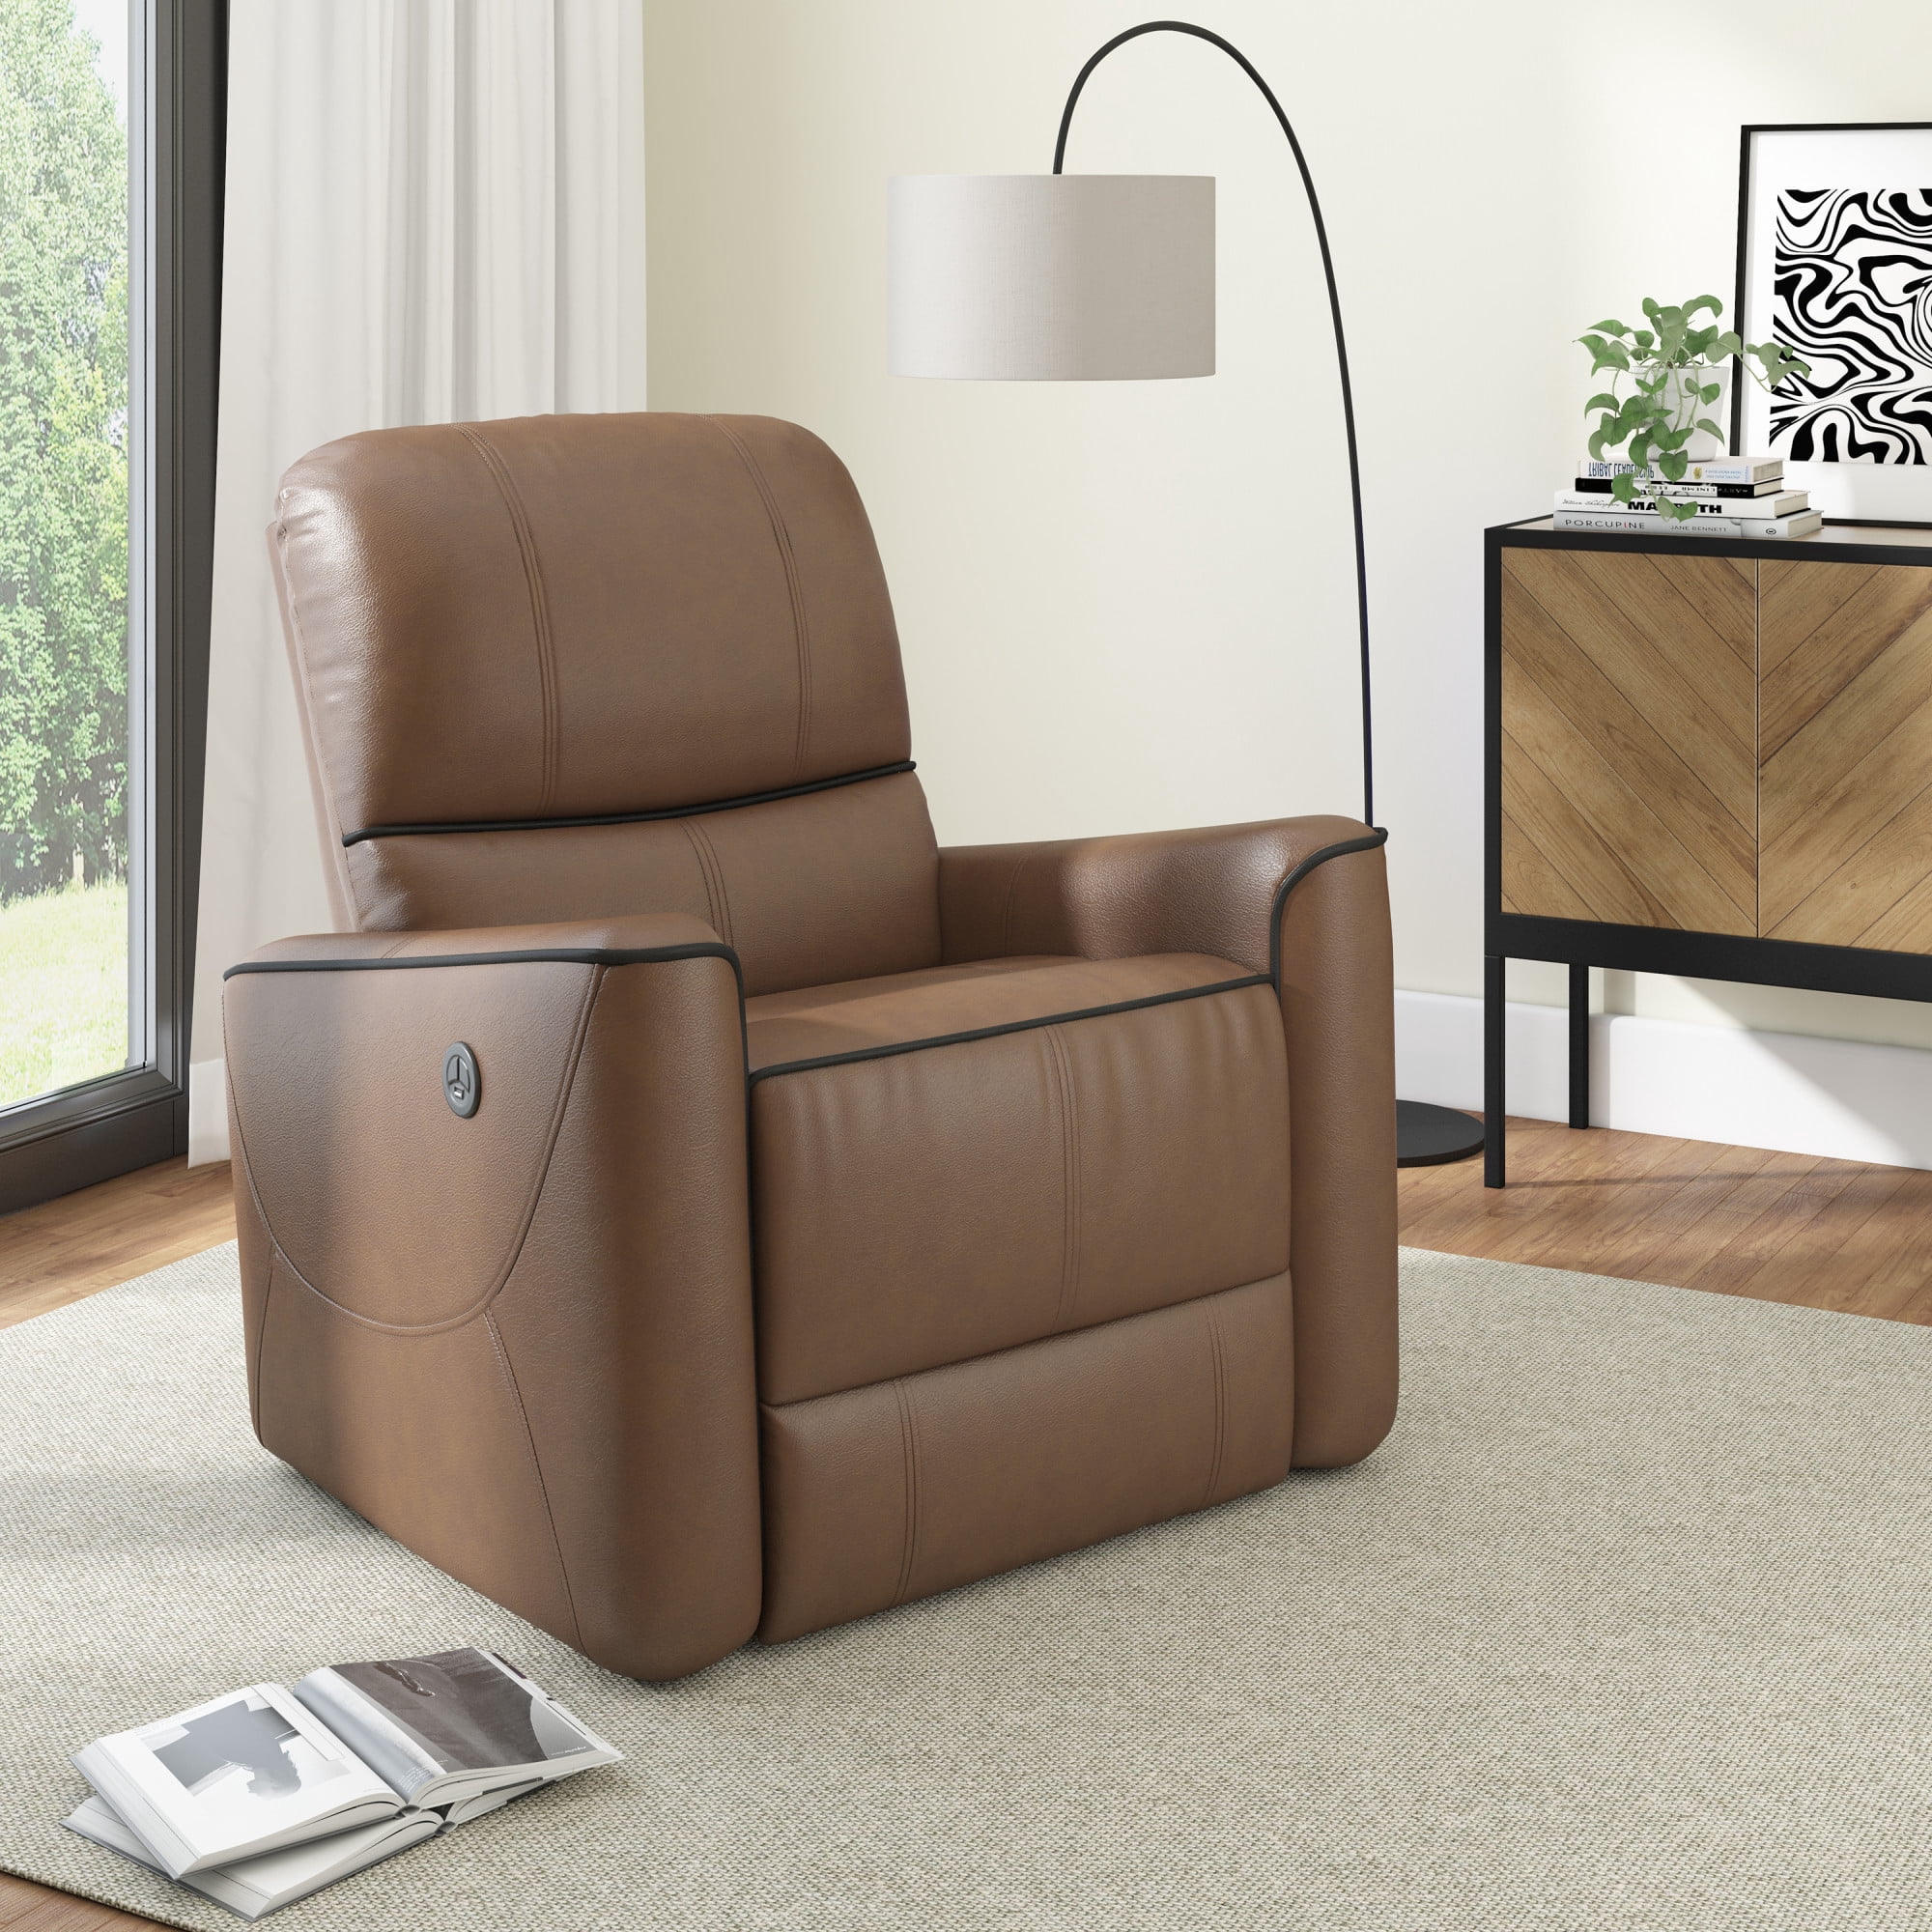 Hillsdale Provenza Faux Leather Power Recliner with USB Port